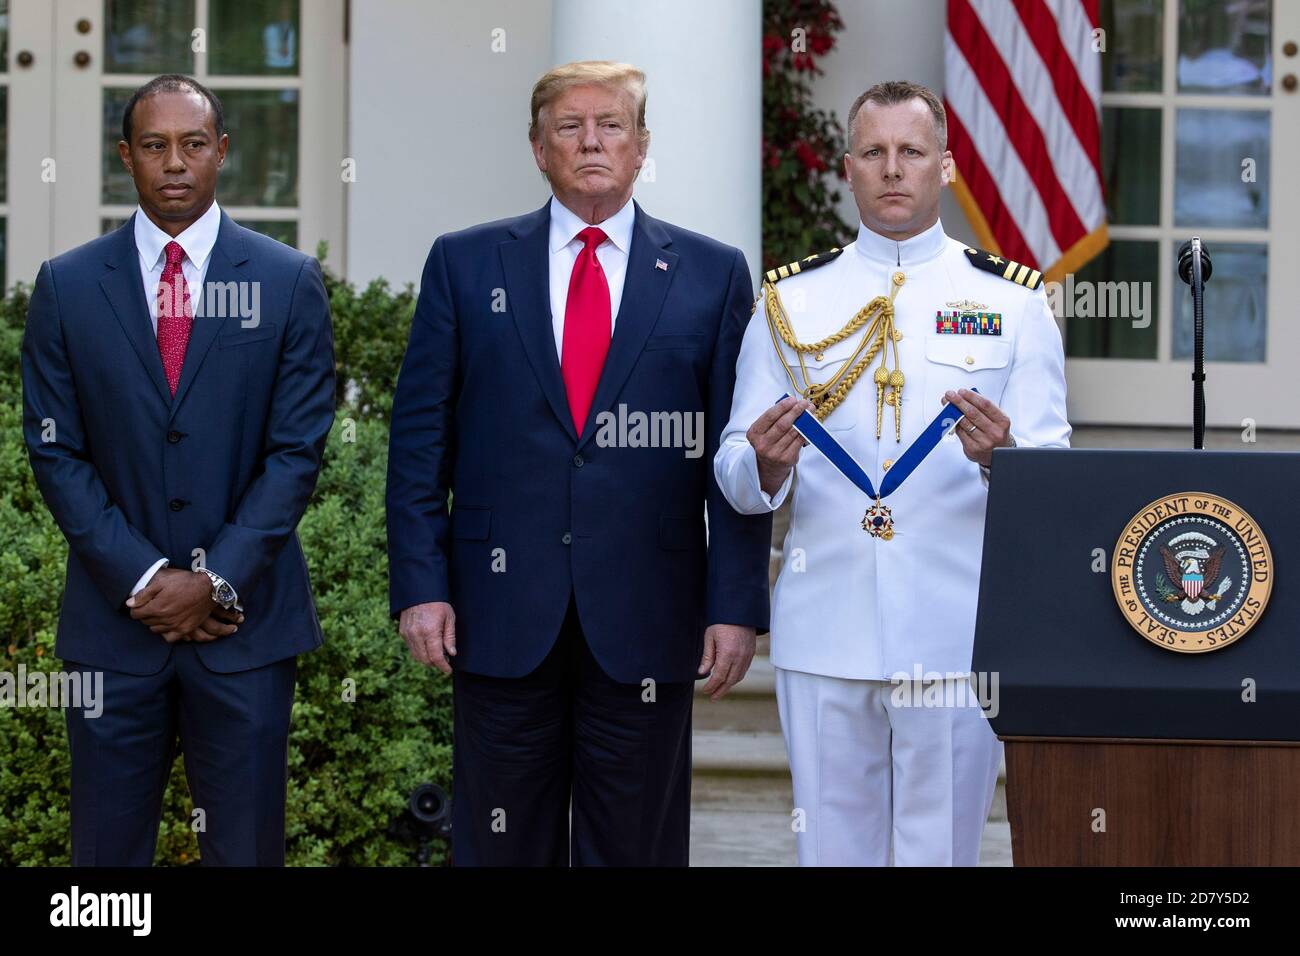 U.S. President Donald Trump prepares to present golfer Tiger Woods with the Presidential Medal of Freedom  in the Rose Garden of the White House in Washington, D.C. on Monday, May 6, 2019. The Presidential Medal of Freedom is the highest honor a U.S. President can bestow on a civilian. Woods is the fourth golfer to receive the award Credit: Alex Edelman/The Photo Access Stock Photo